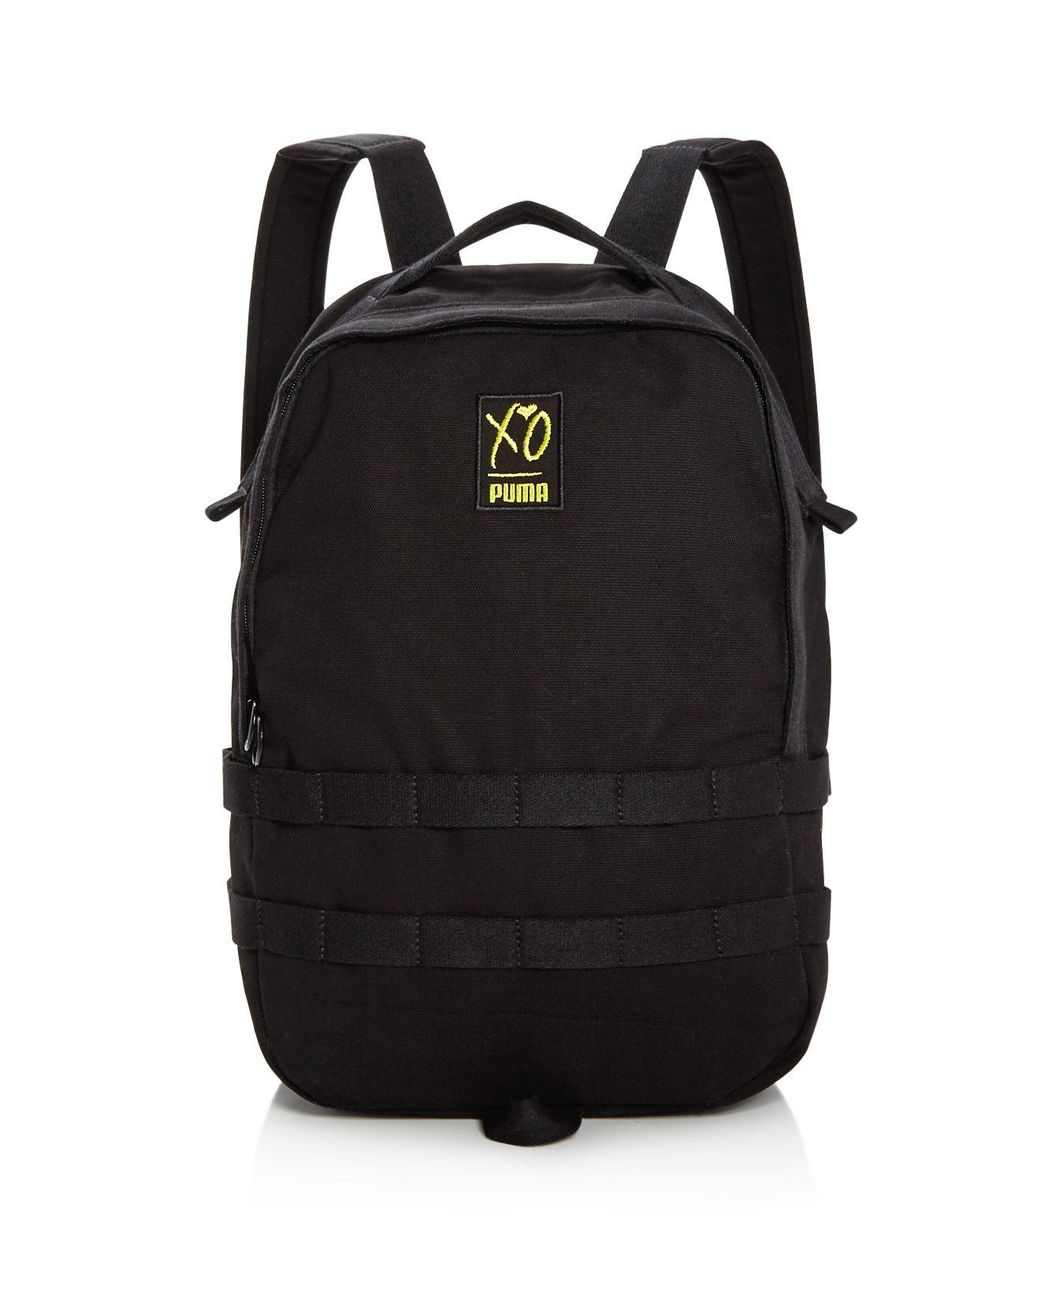 PUMA X Xo The Weeknd Backpack in Black for Men | Lyst